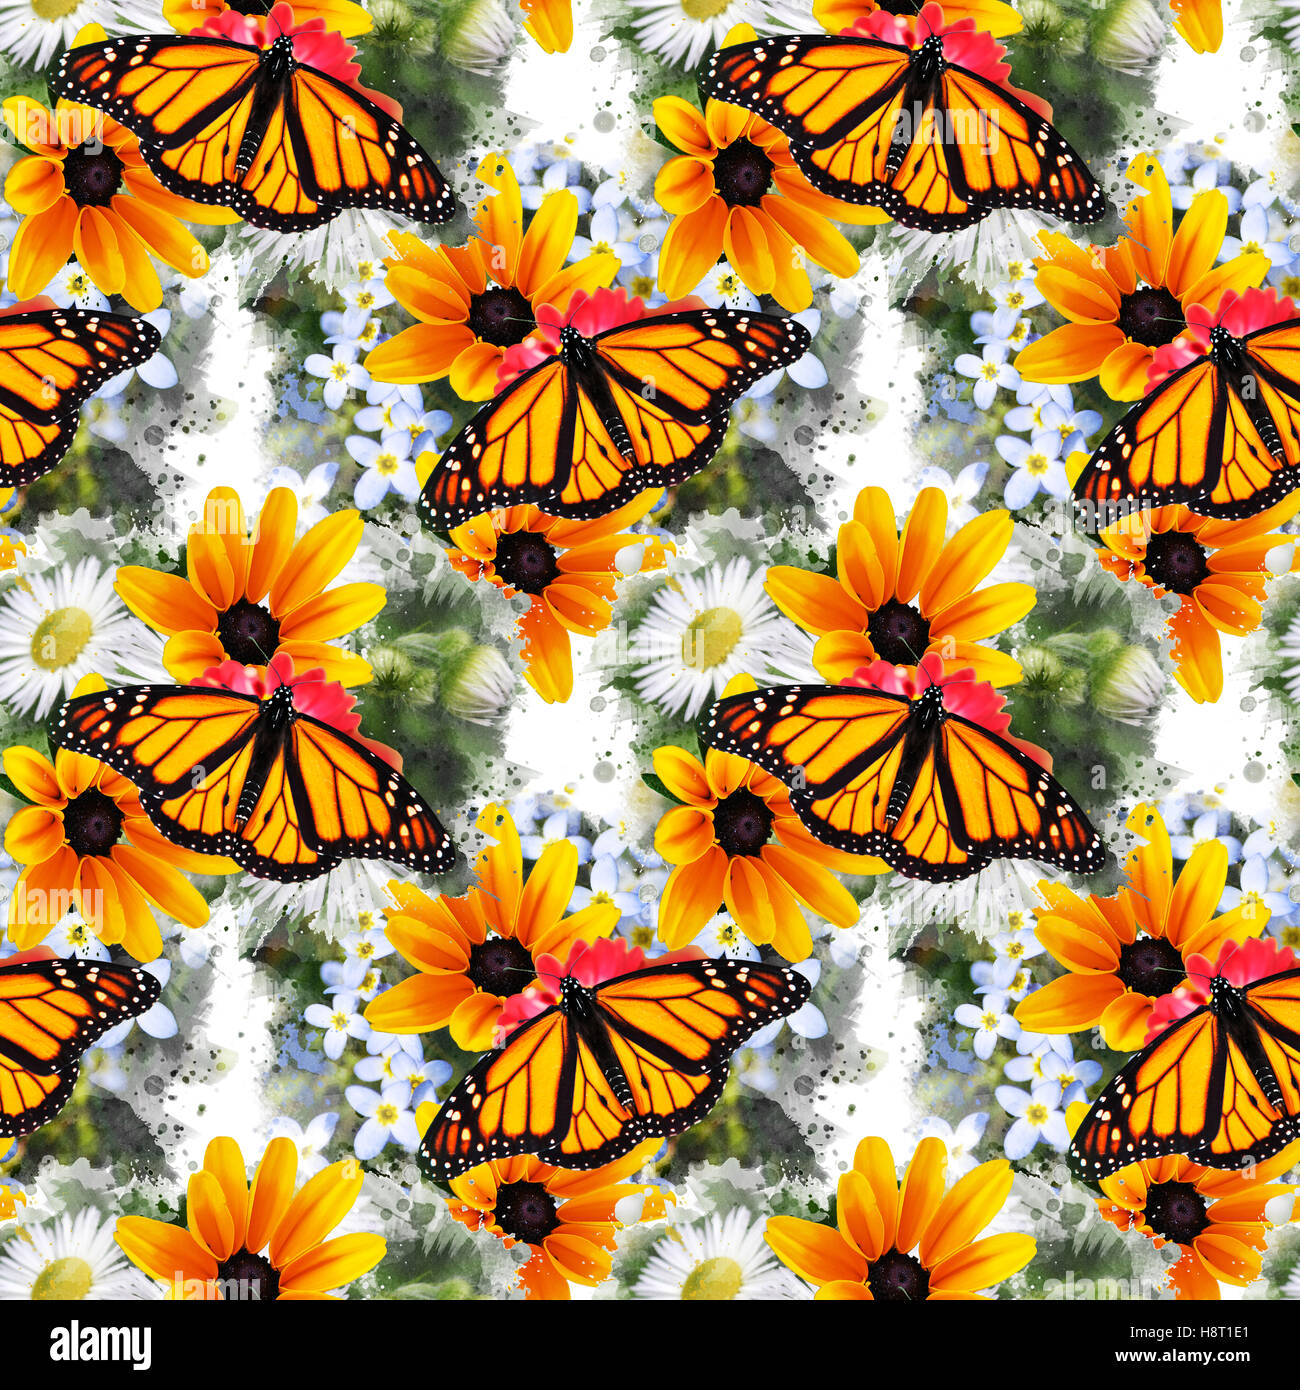 Monarch Butterfly flower pattern Banque D'Images